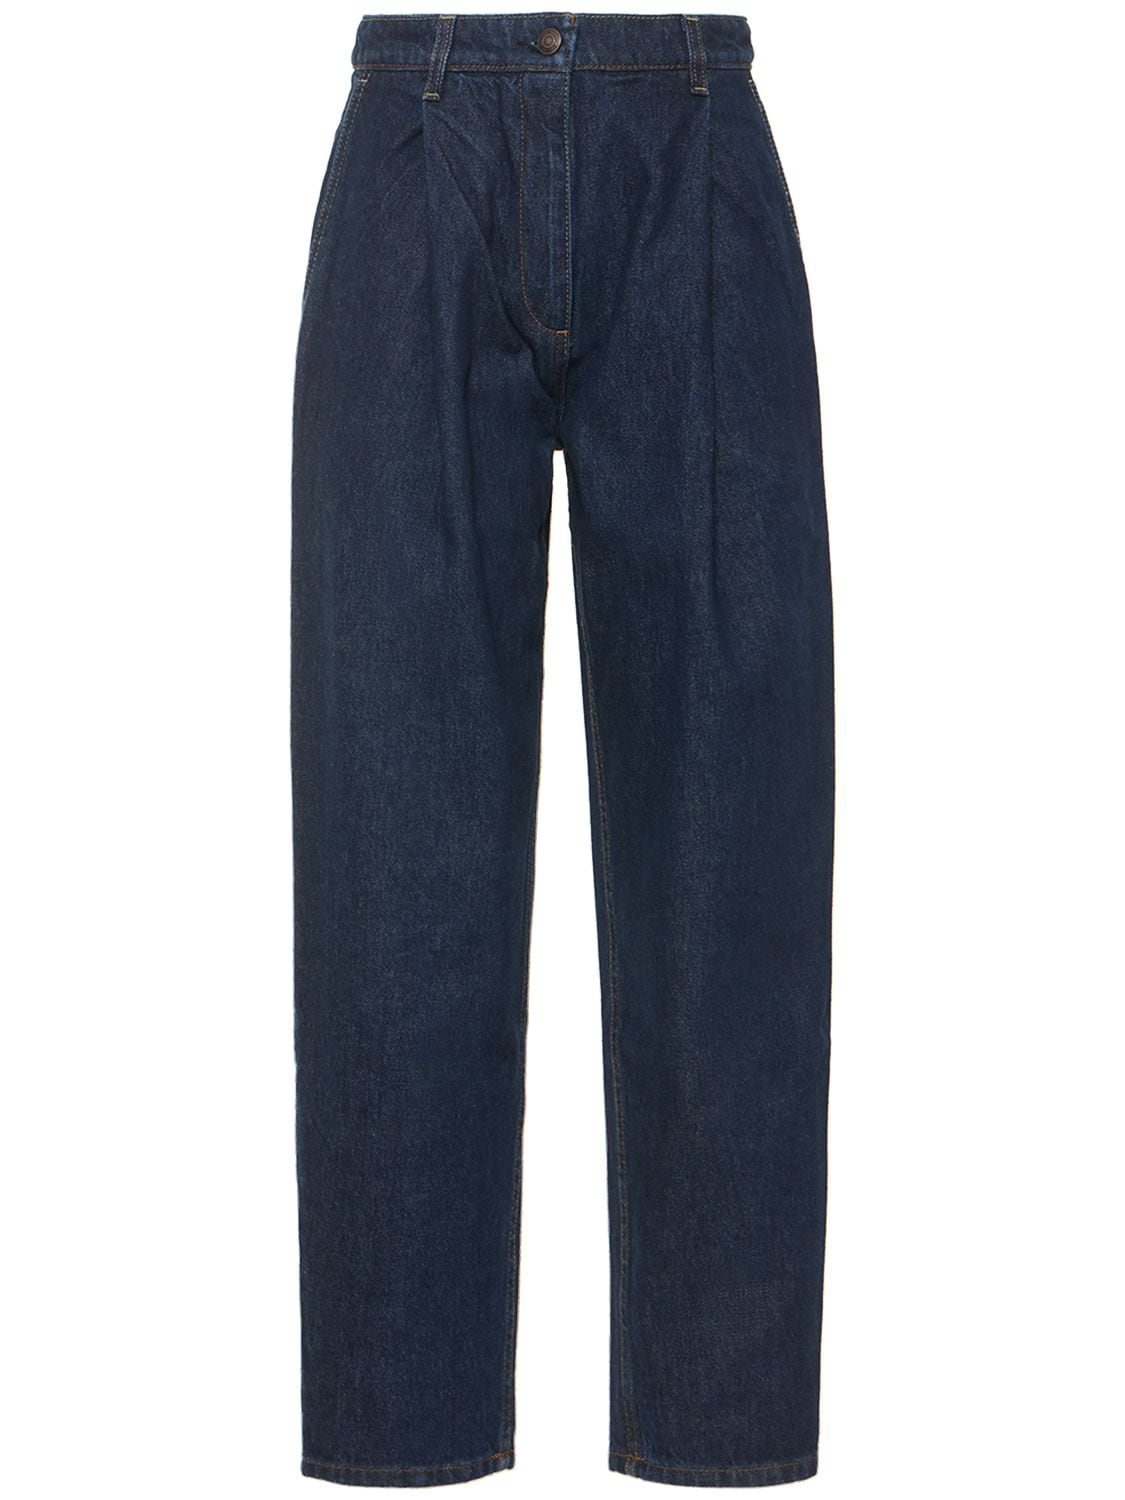 Image of High Rise Cotton Denim Baggy Jeans